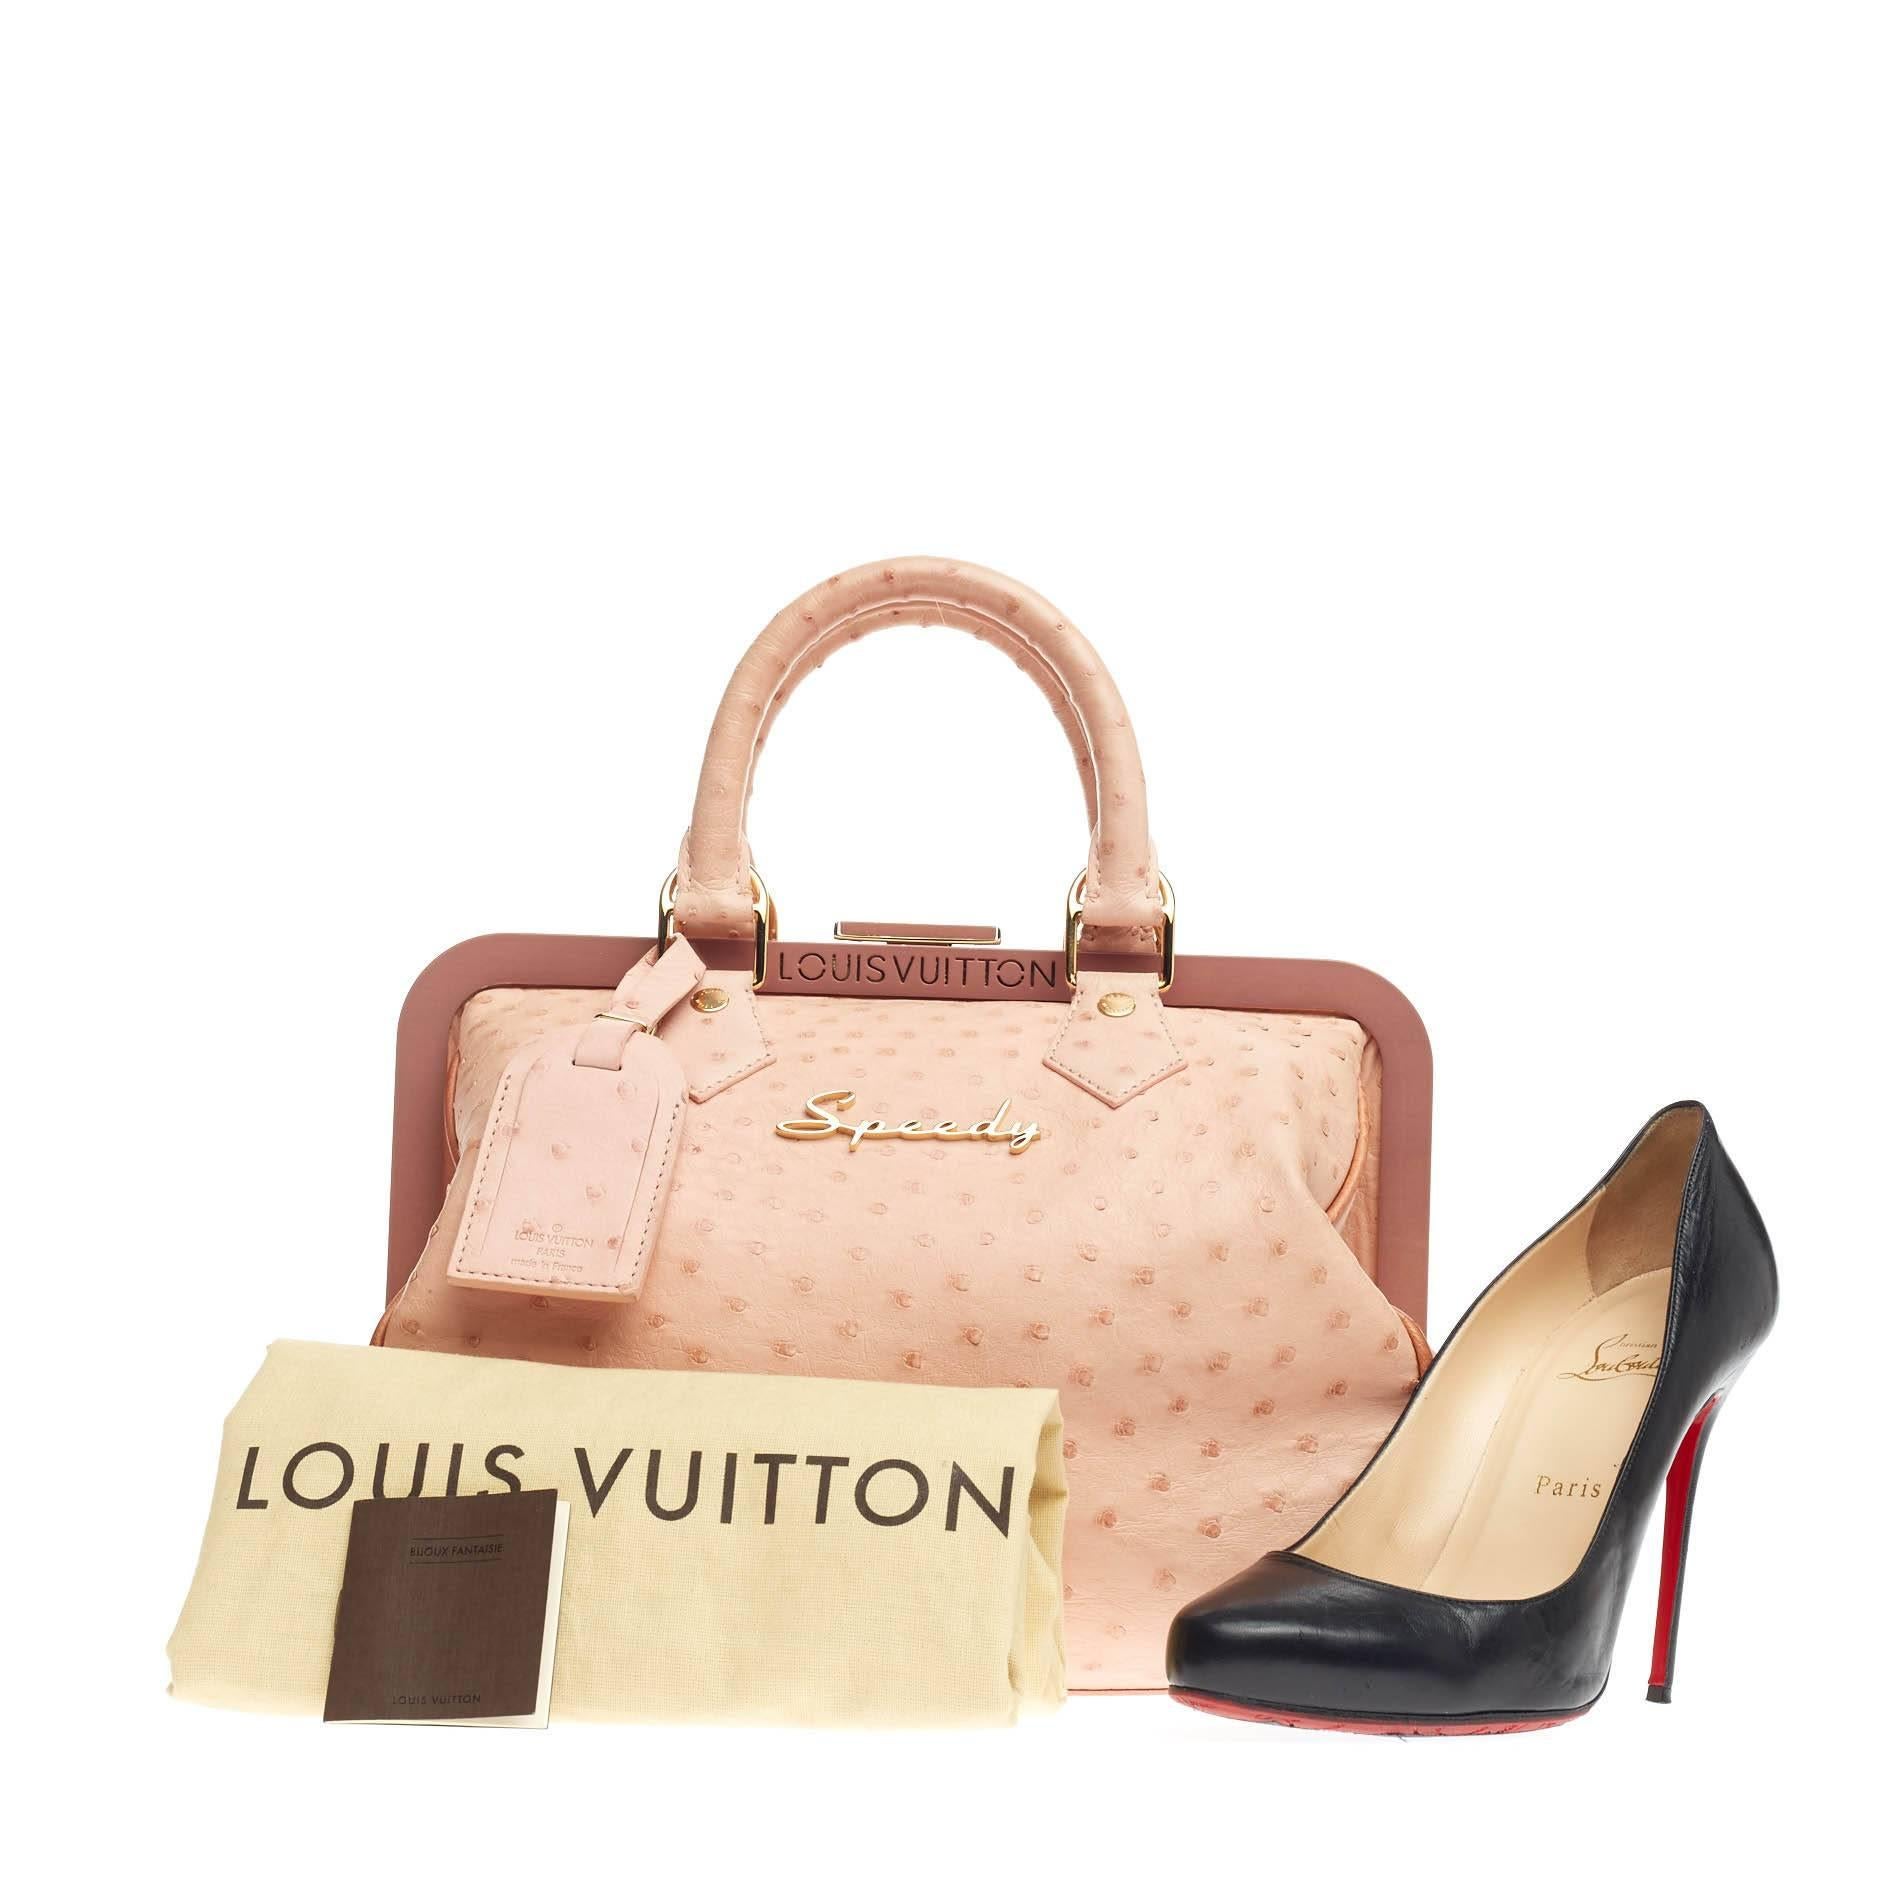 This authentic Louis Vuitton Frame Speedy Ostrich is an ultra-rare piece first seen on the runway of Marc Jacob's Spring/Summer 2008 Collection. Crafted from poudre pink genuine ostrich skin, this limited edition feminine piece features dual-rolled